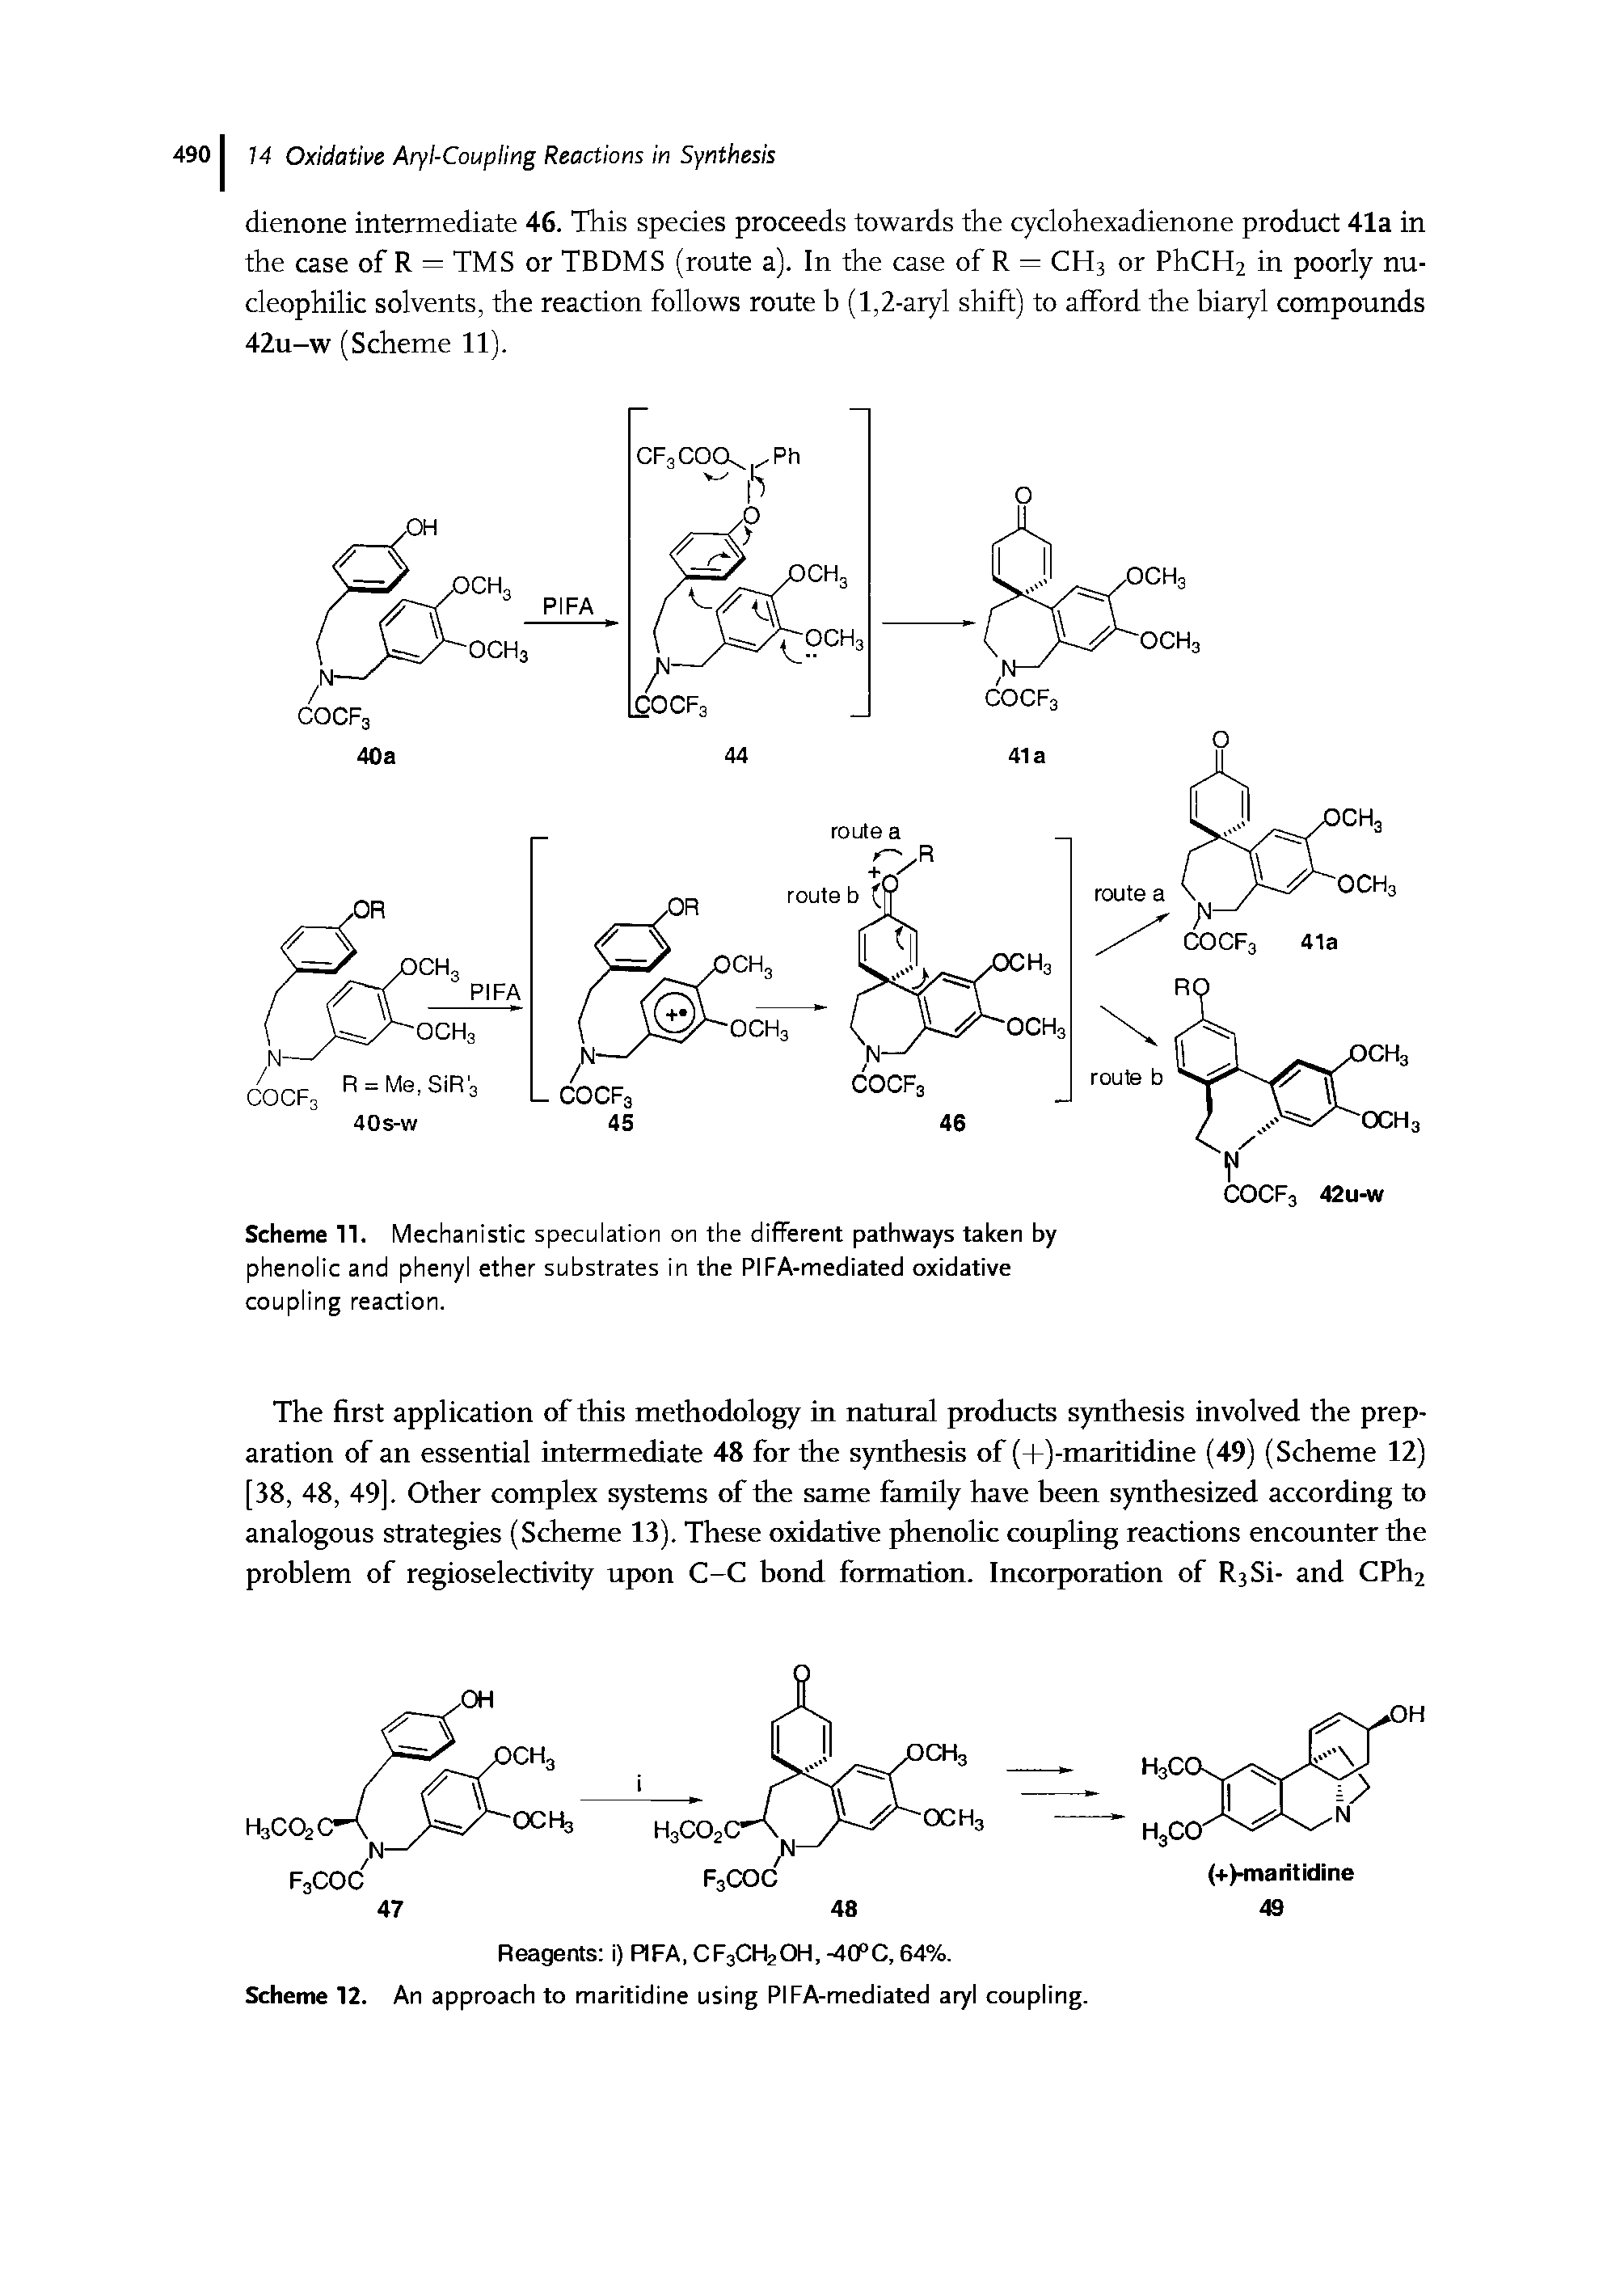 Scheme 11. Mechanistic speculation on the different pathways taken by phenolic and phenyl ether substrates in the PIFA-mediated oxidative coupling reaction.